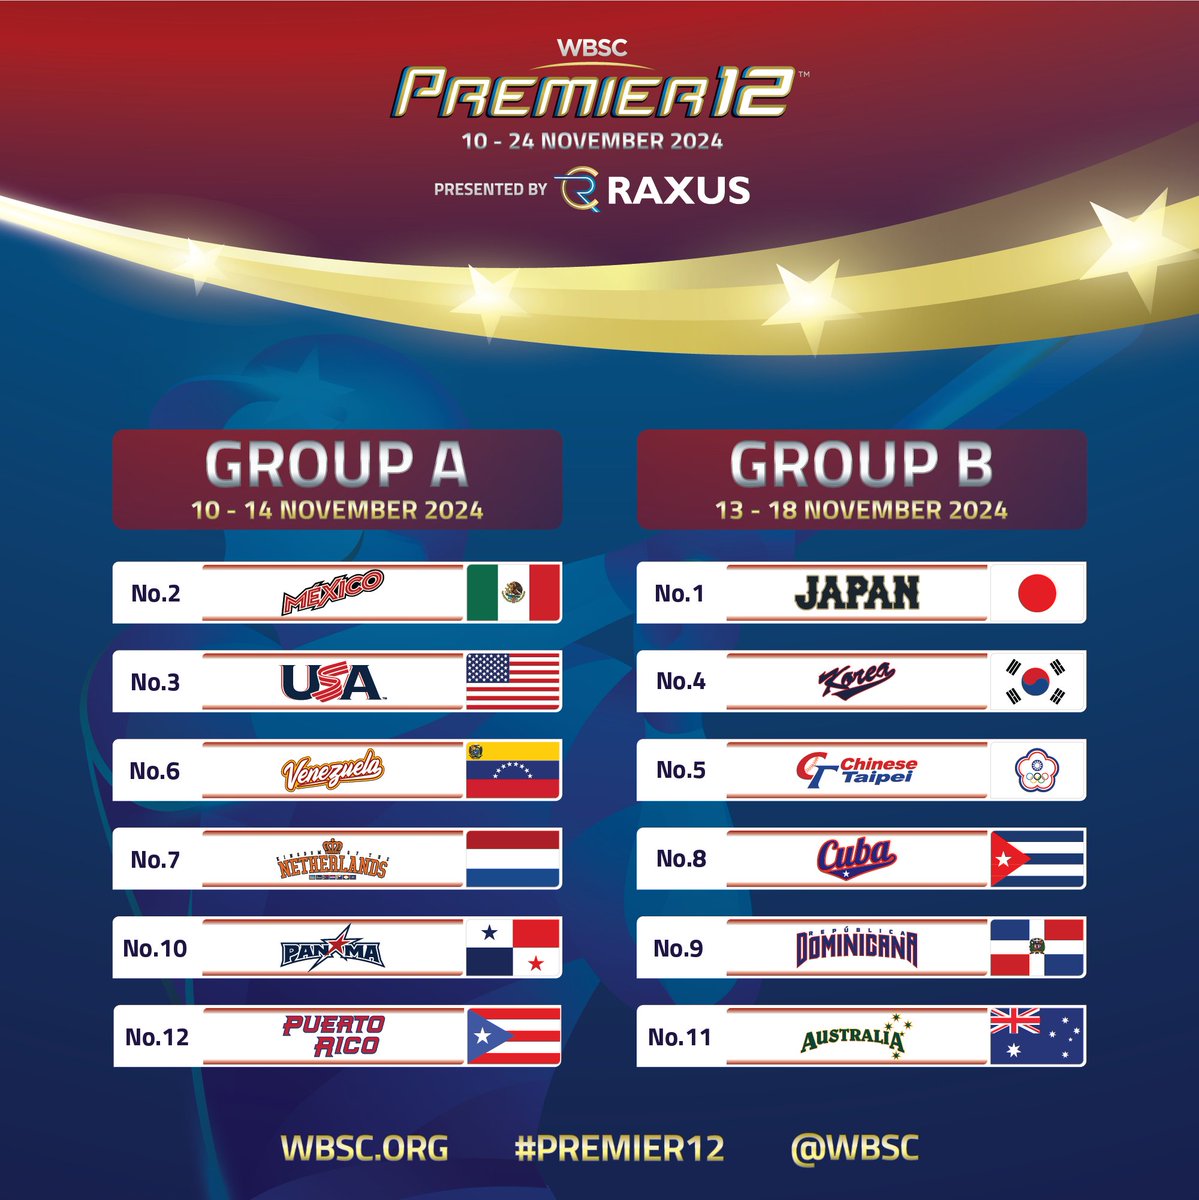 🌏⚔️ The Global Baseball Battle is set! 🔝⚾ Groups announced for @Premier12 2024 presented by RAXUS. 🔗 Check out the details here: wbsc.org/en/events/2024… #Premier12